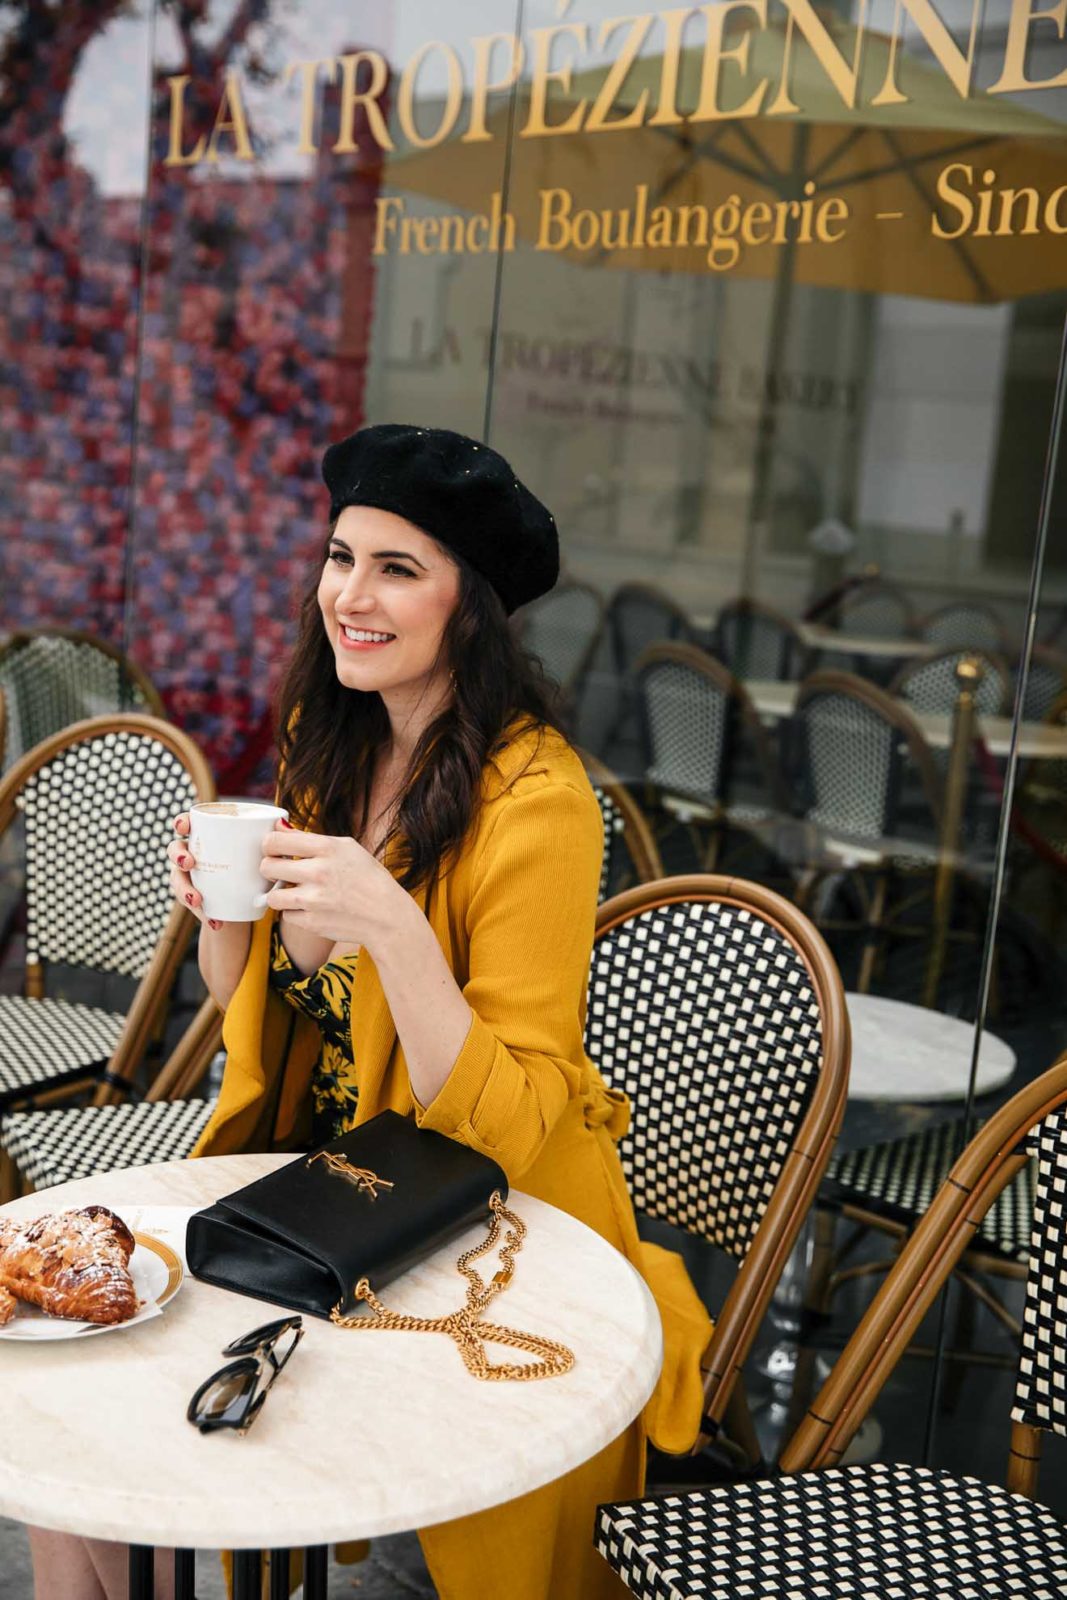 Parisian Outfit Inspiration by Los Angeles Fashion Blogger Laura Lily, La Tropezienne French Bakery Los Angeles